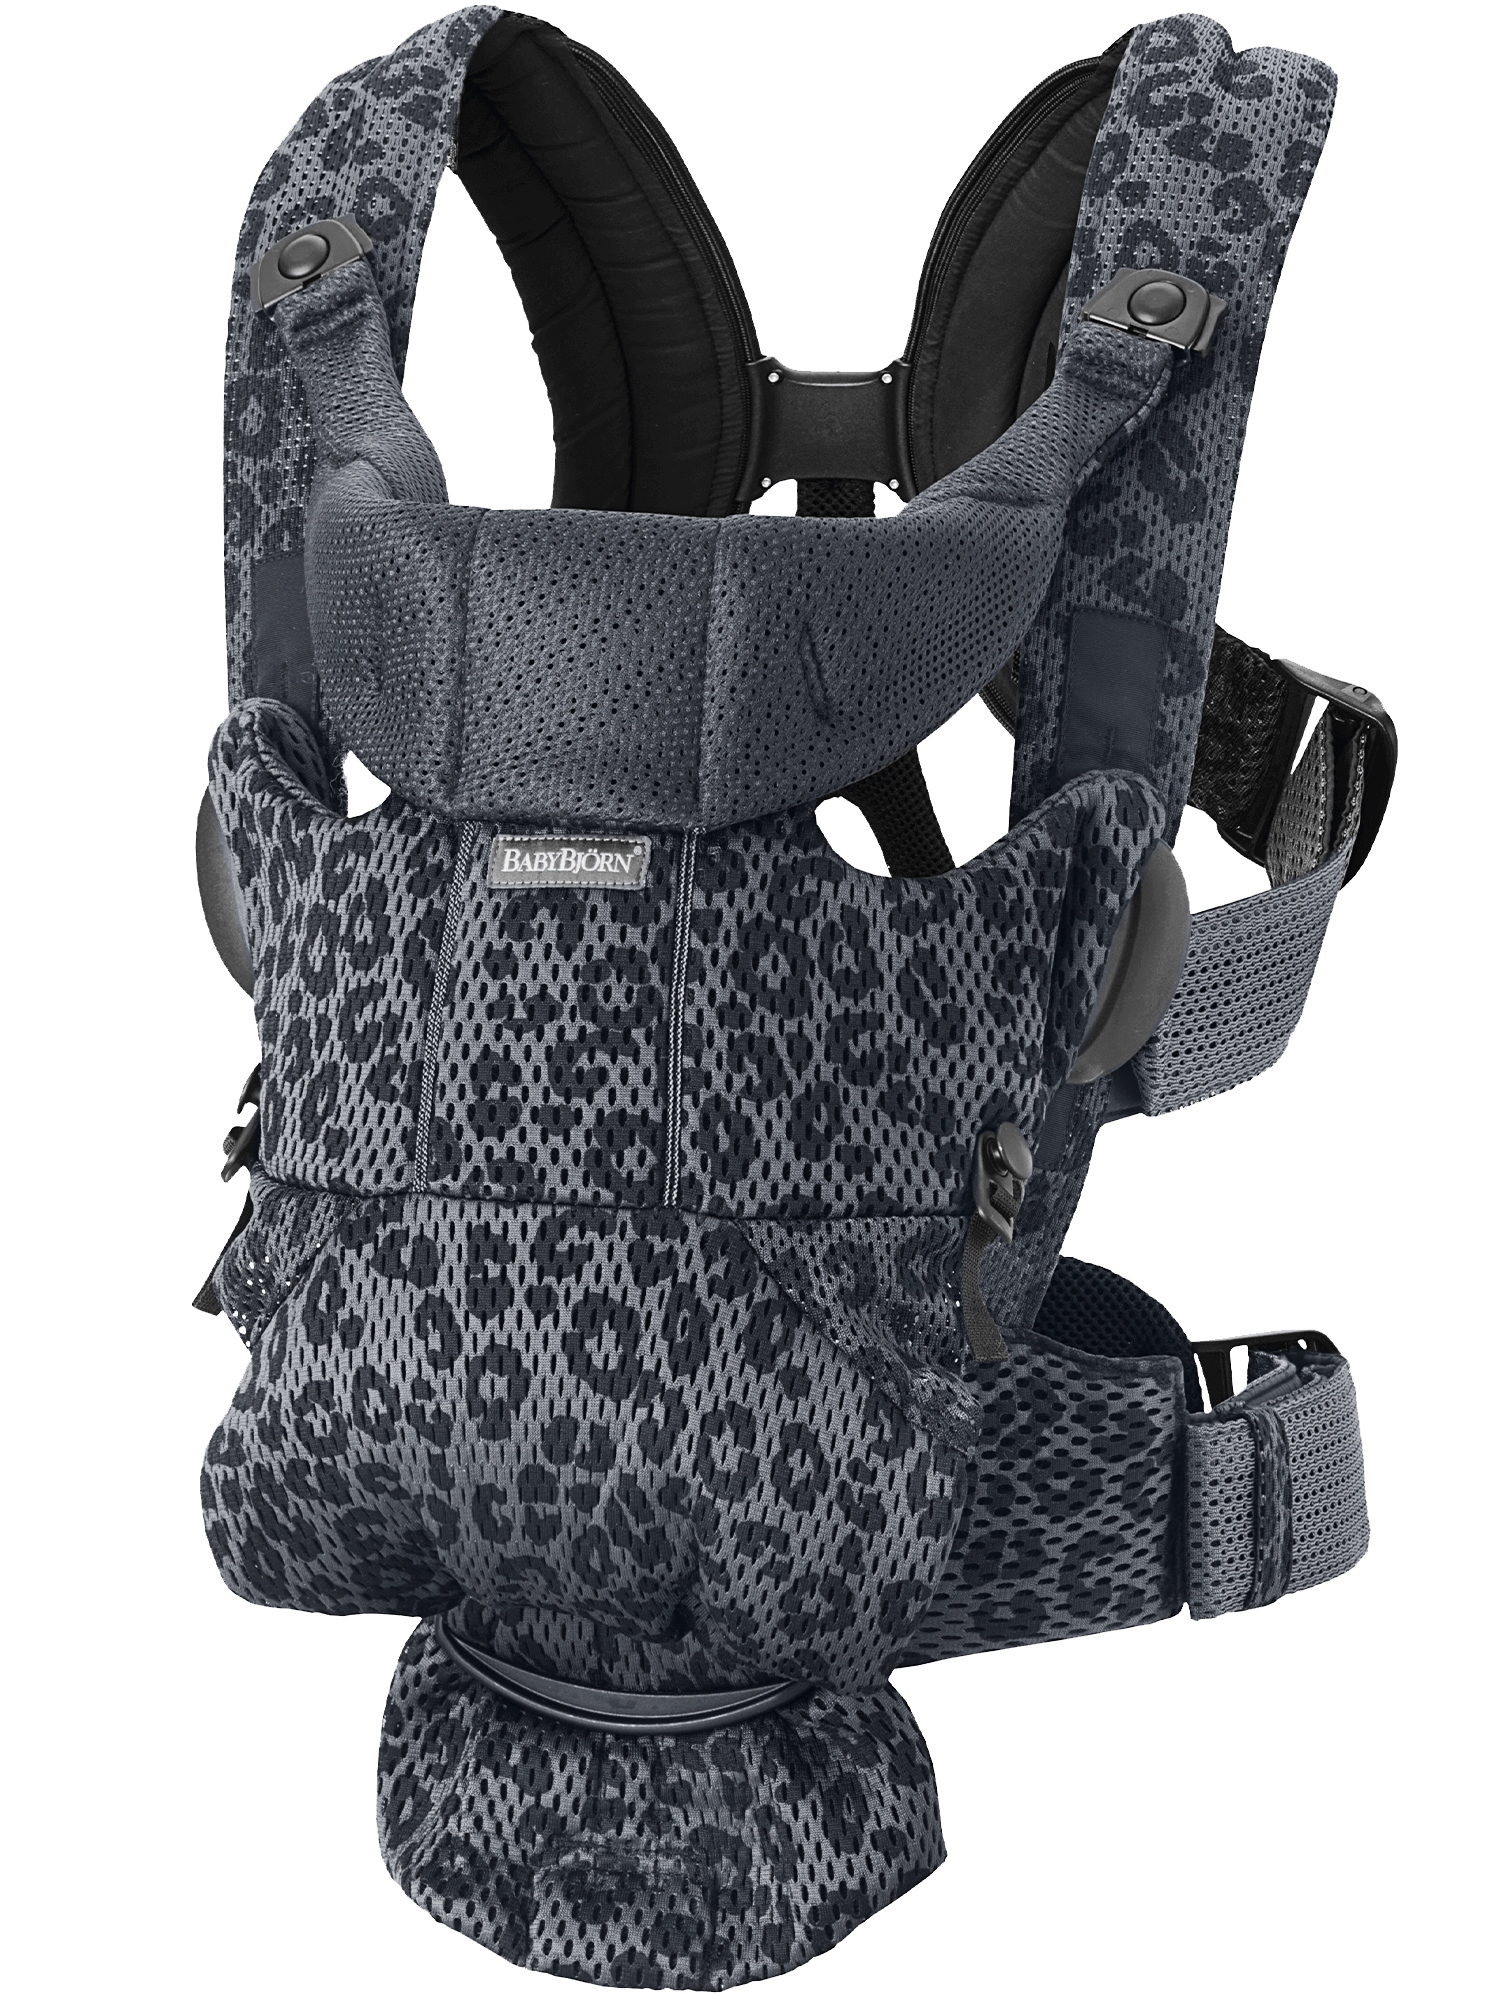 BabyBjörn Baby Carrier Free